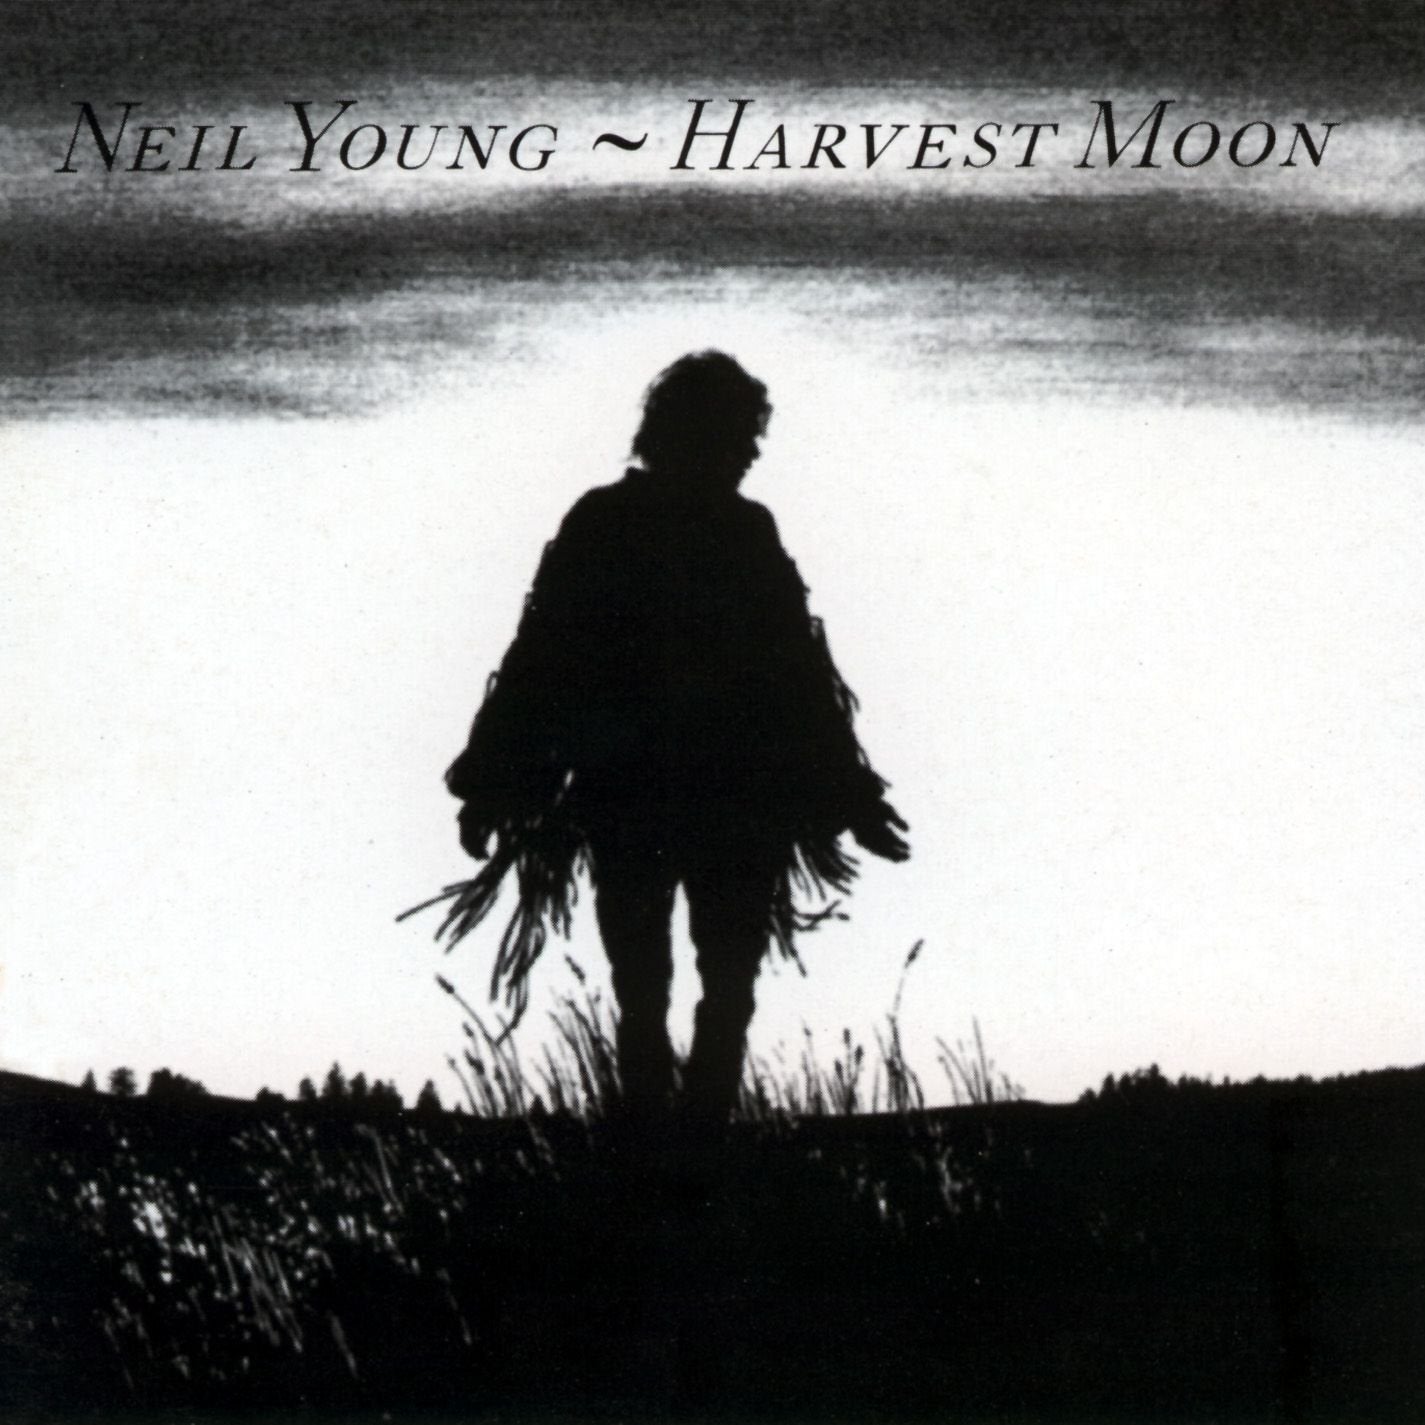 Order Neil Young - Harvest Moon (Indie Exclusive 2xLP Crystal Clear Vinyl)